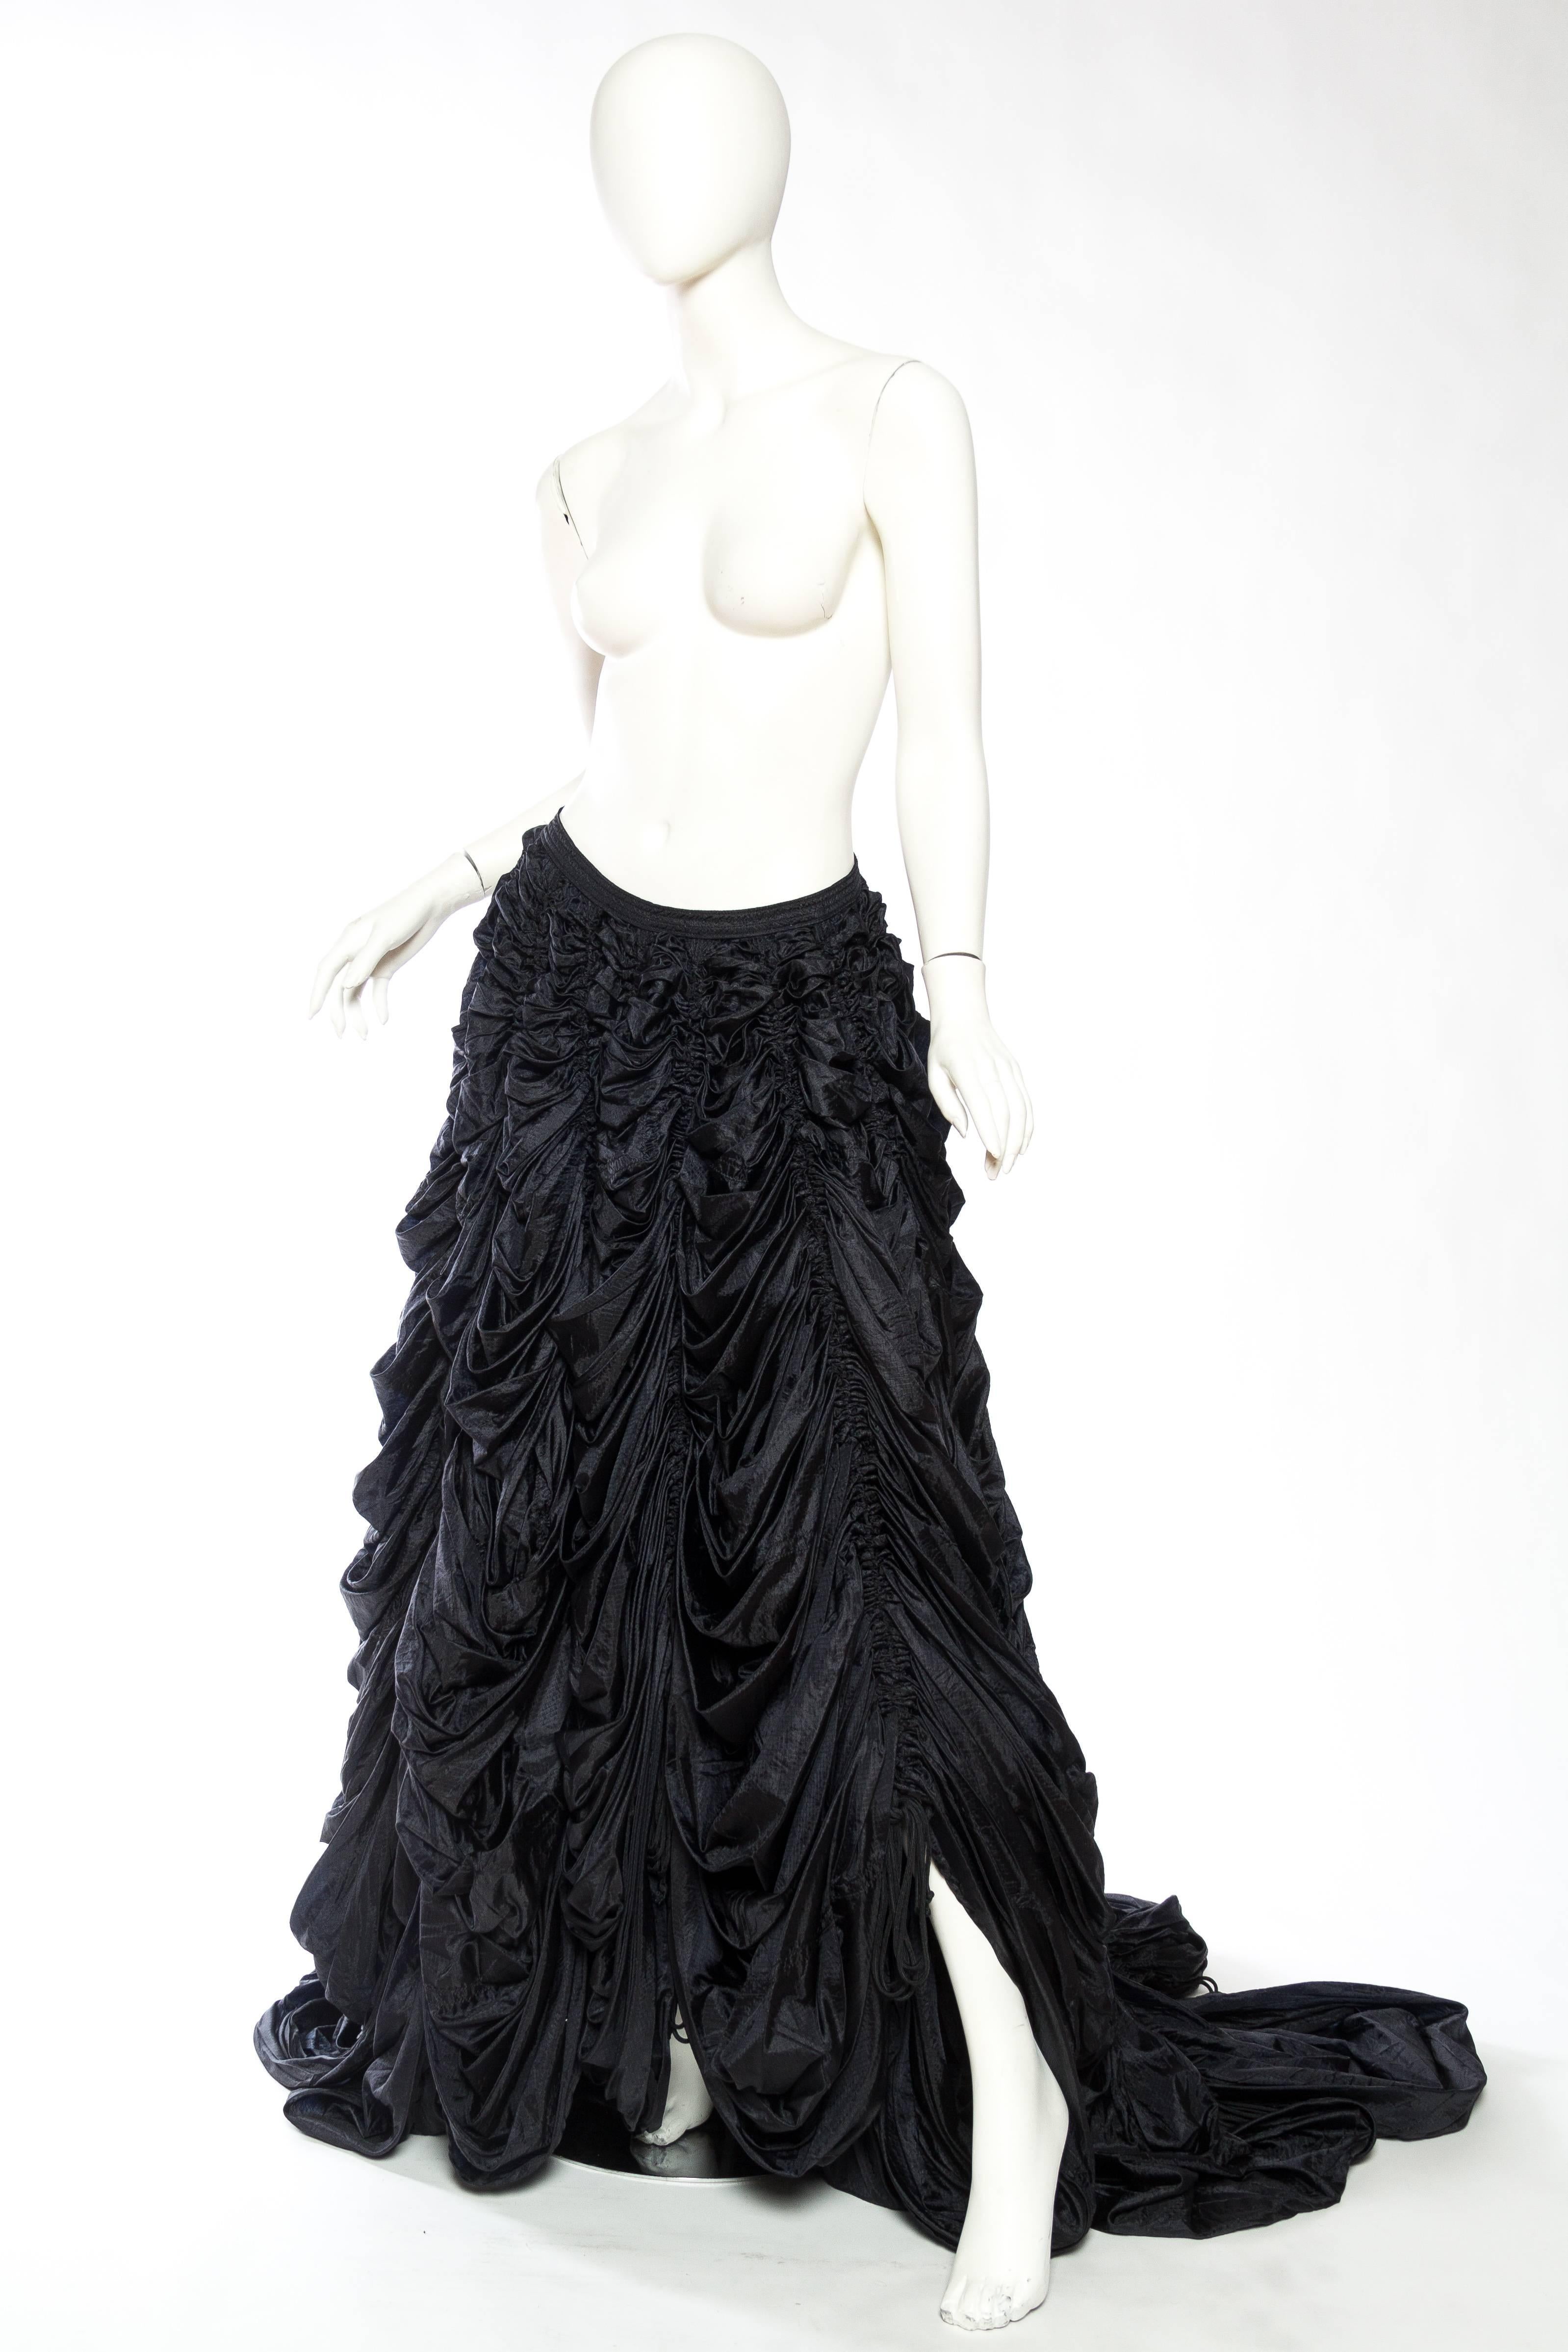 This skirt can be adjusted with the ruching to become a bubble skirt, a high-low, or fully trained red-carpet ready ball skirt. 

Please note we have a collection of rare co-ordinating parachute pieces purchased directly from Norma Kamali's archives